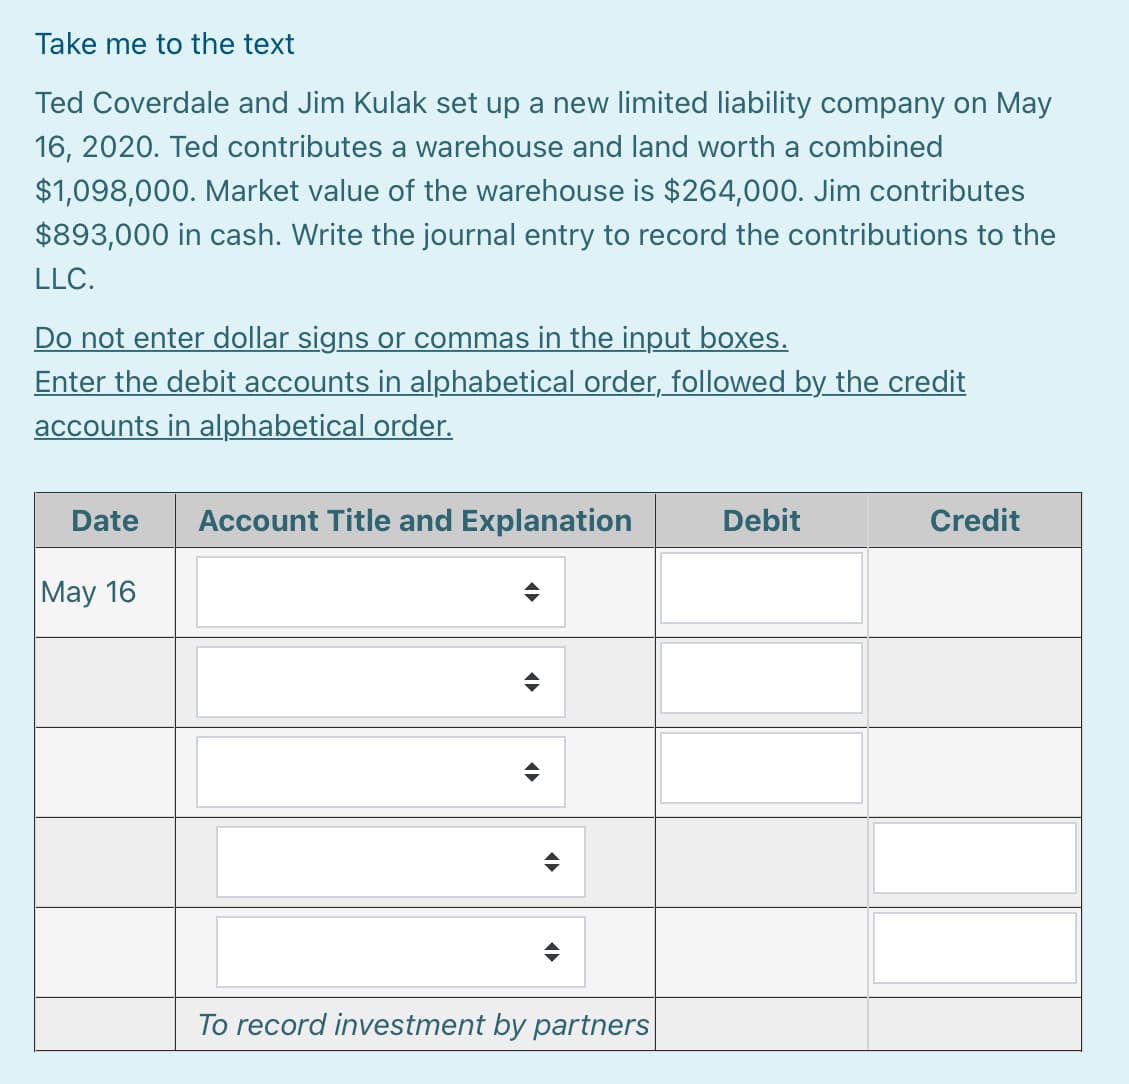 Take me to the text
Ted Coverdale and Jim Kulak set up a new limited liability company on May
16, 2020. Ted contributes a warehouse and land worth a combined
$1,098,000. Market value of the warehouse is $264,000. Jim contributes
$893,000 in cash. Write the journal entry to record the contributions to the
LLC.
Do not enter dollar signs or commas in the input boxes.
Enter the debit accounts in alphabetical order, followed by the credit
accounts in alphabetical order.
Date
Account Title and Explanation
Debit
Credit
May 16
To record investment by partners
